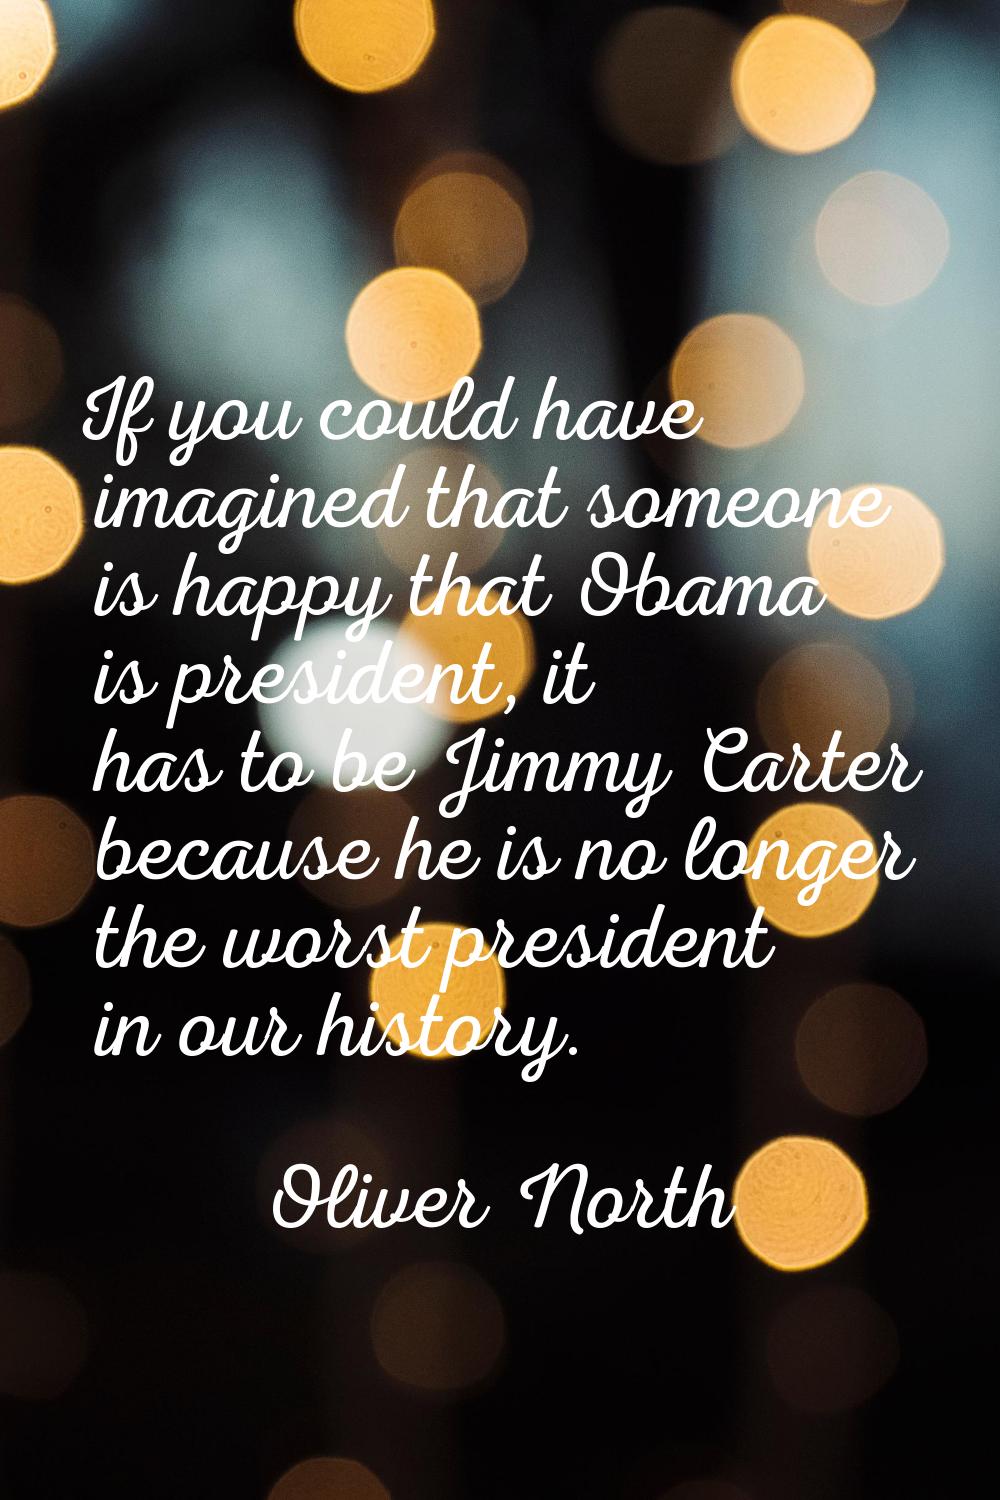 If you could have imagined that someone is happy that Obama is president, it has to be Jimmy Carter